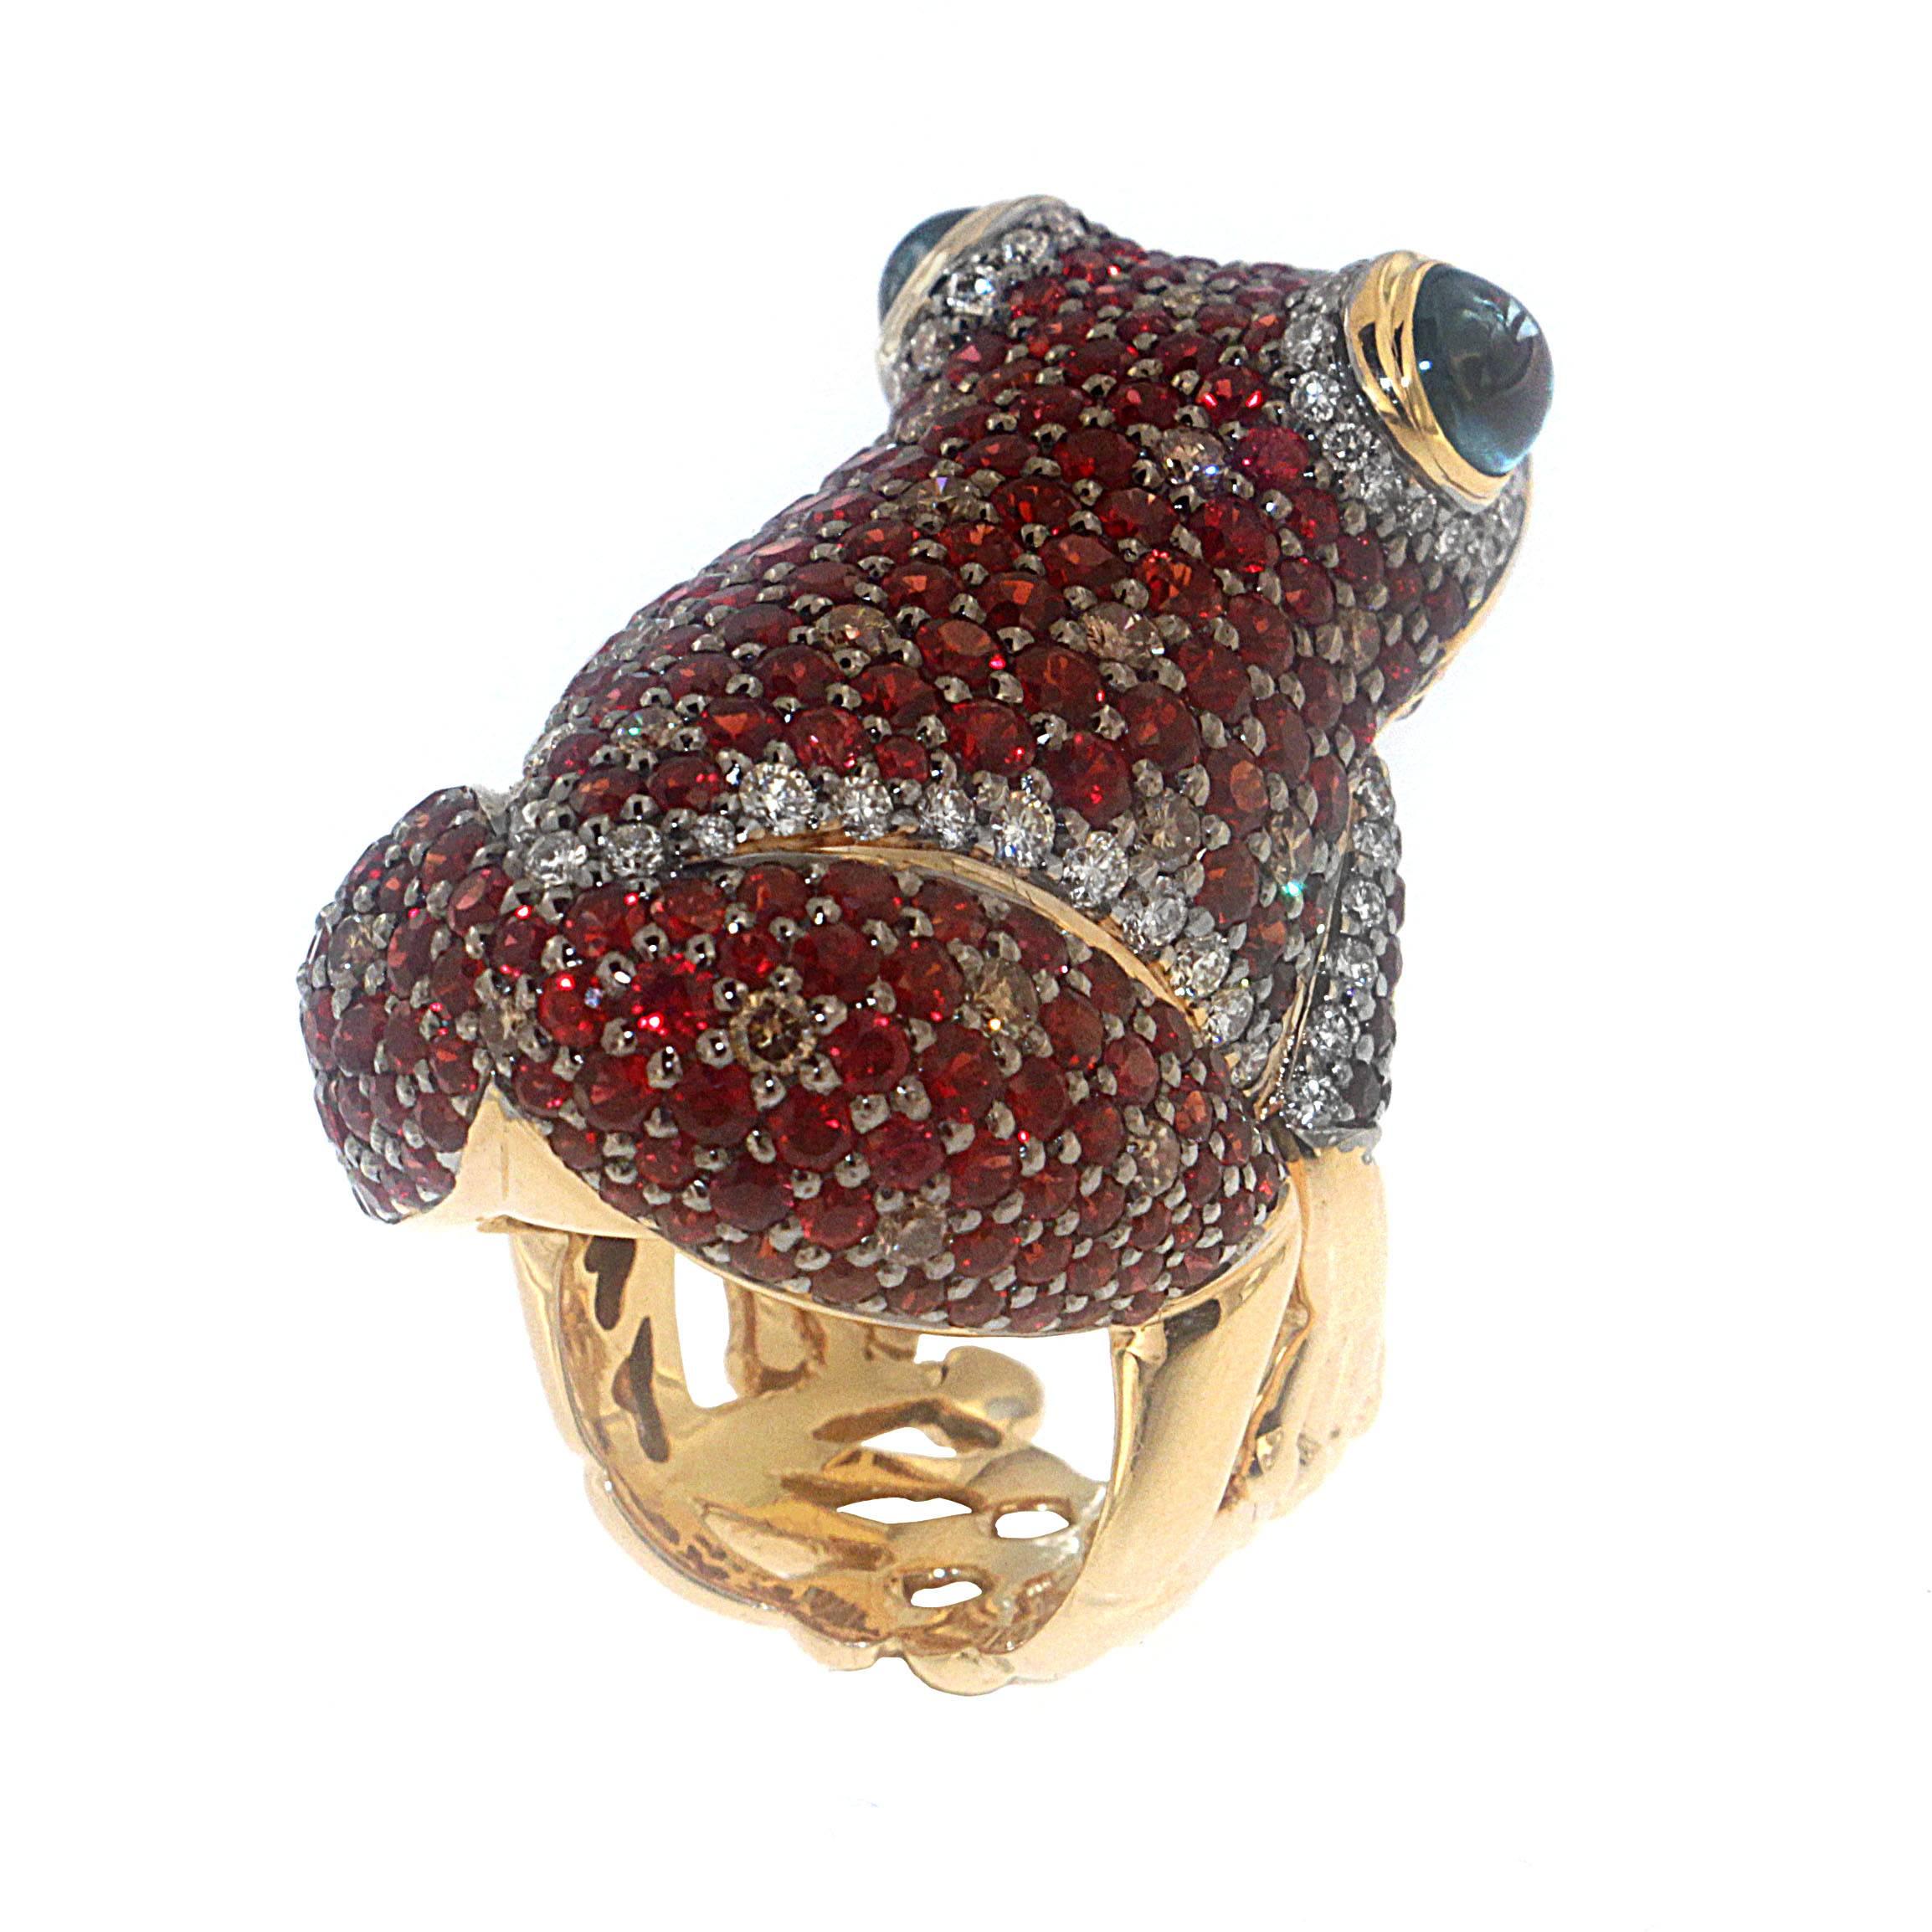 Delight in your love of animals with Zorab's hand-crafted charming Red Sapphire frog. The 18 Karat Gold ring is set with 13.92 Red Sapphires and accented with 1.11 carat Brown Diamonds, 1.38 carat White Diamonds, and 3.22 carat Blue Natural